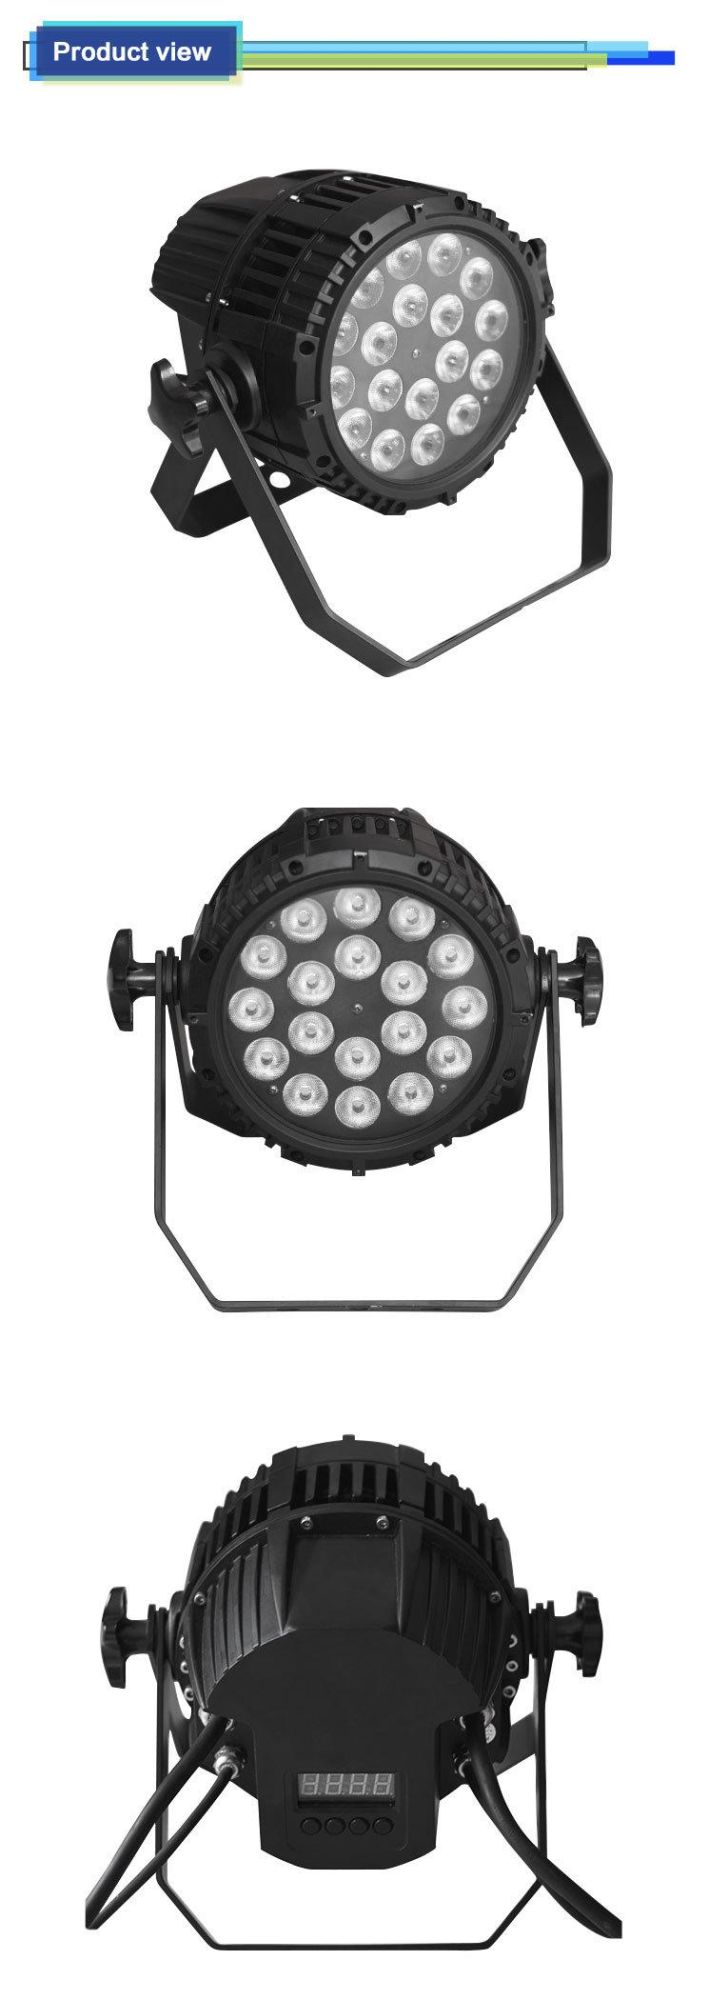 LED 18PCS Fullcolor Waterproof PAR Light with Zooming